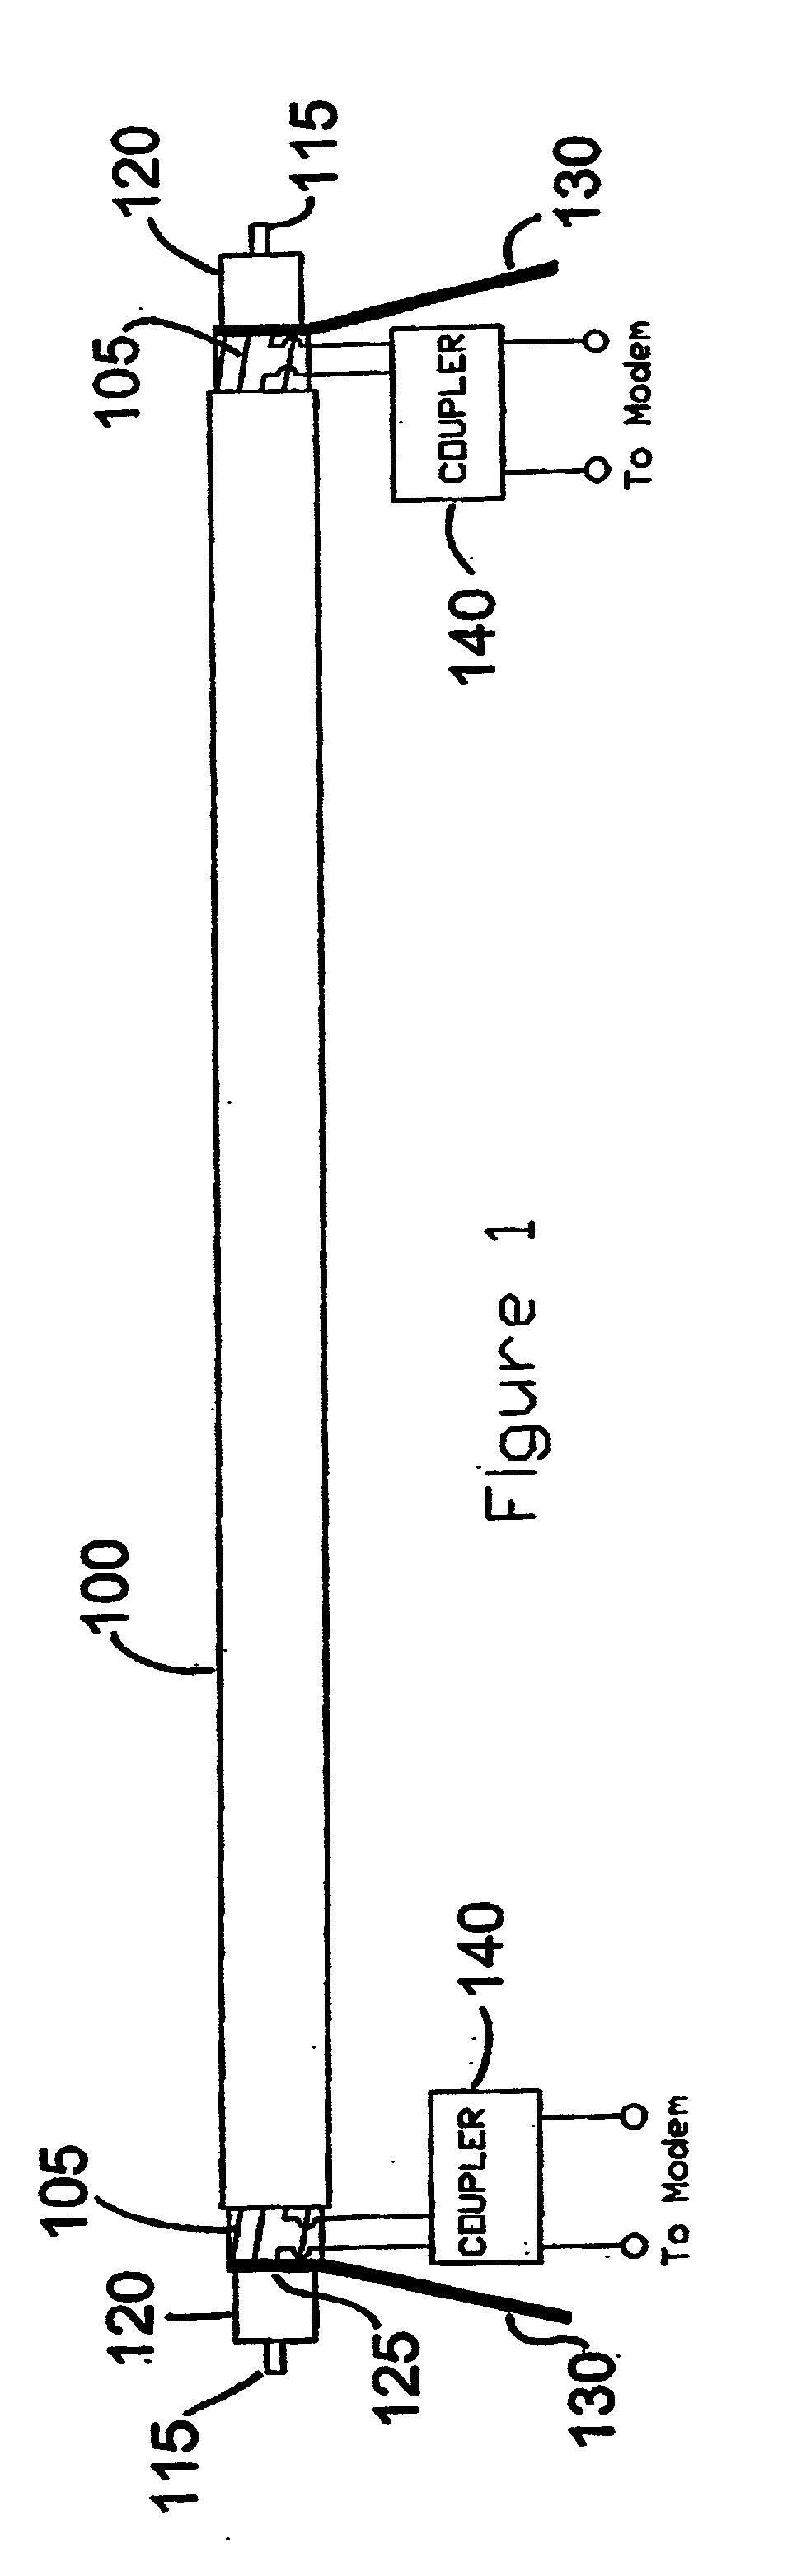 Inductive coupling of a data signal to a power transmission cable